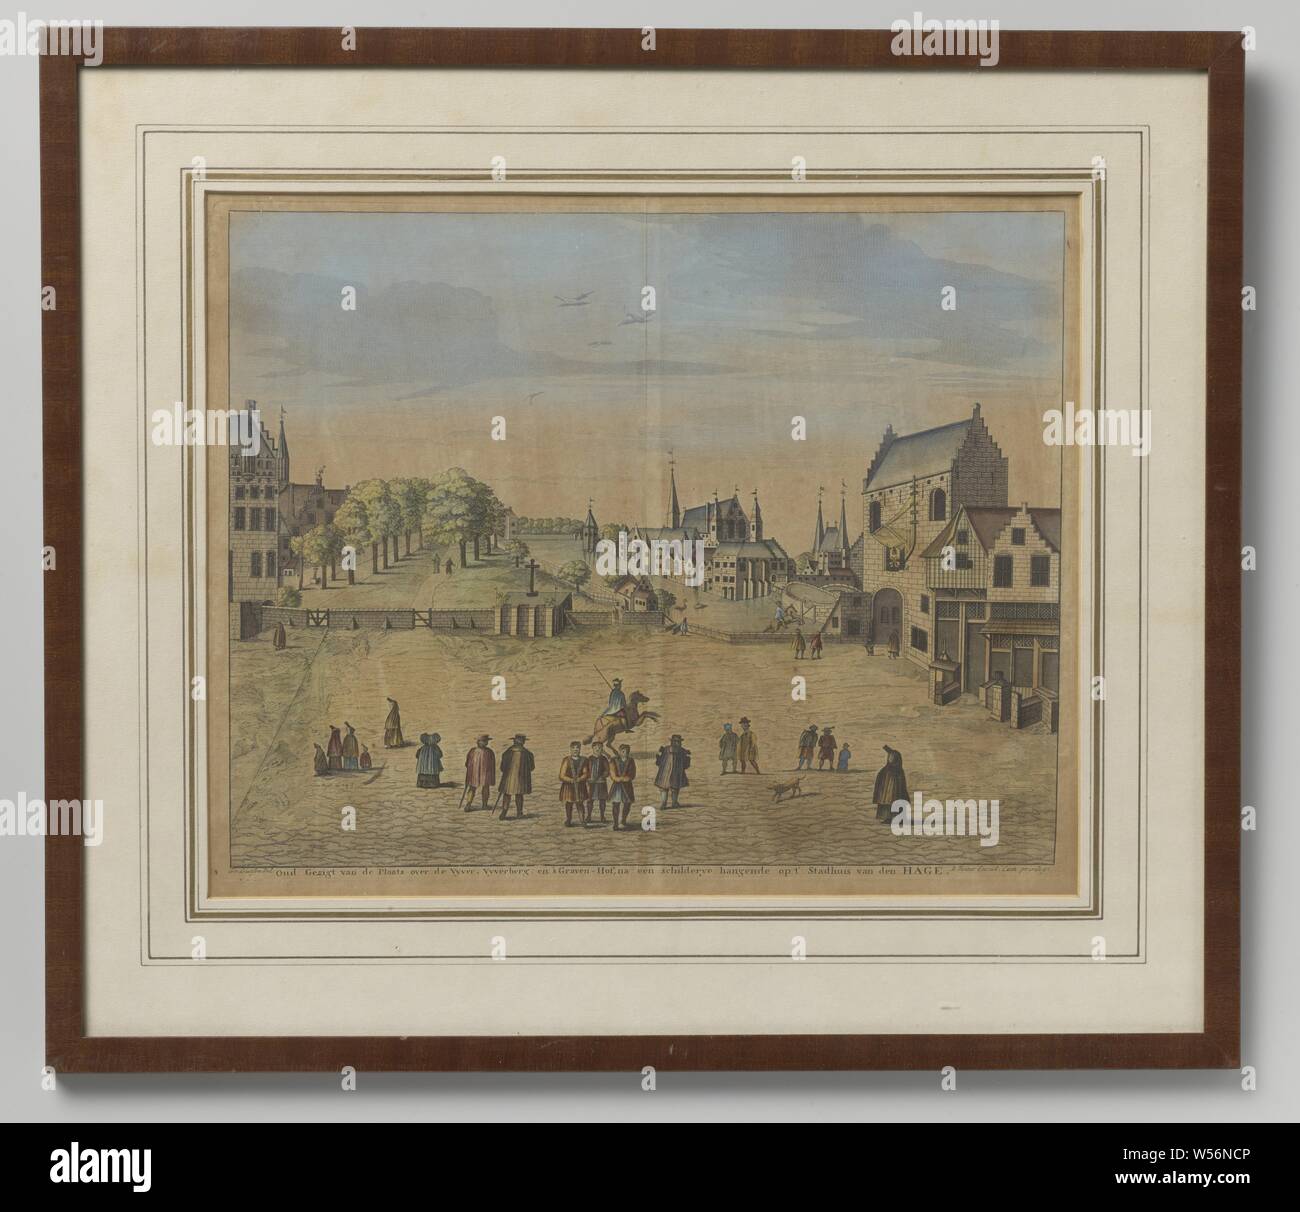 Oud Gezigt van de Plaats across the Vijver, Vijverberg and 's-Gravenhof, Colored print on brown discolored paper of a square with people in front of buildings, a park, pond and again buildings with streamers. Mounted in paper, framed in wood behind glass. Achterkant: 'Offered on 24 June 1955 to Dr. ir. W. Drees, Prime Minister by the officials of the department of general affairs on the occasion of his second lustrum as minister. ' Reproduction to a painting hanging at 't Stadhuis van den Hage, The Hague, Willem Drees, Reinier Boitet, Netherlands, 1952, paper, printing, h 420 mm × w 490 mm d Stock Photo